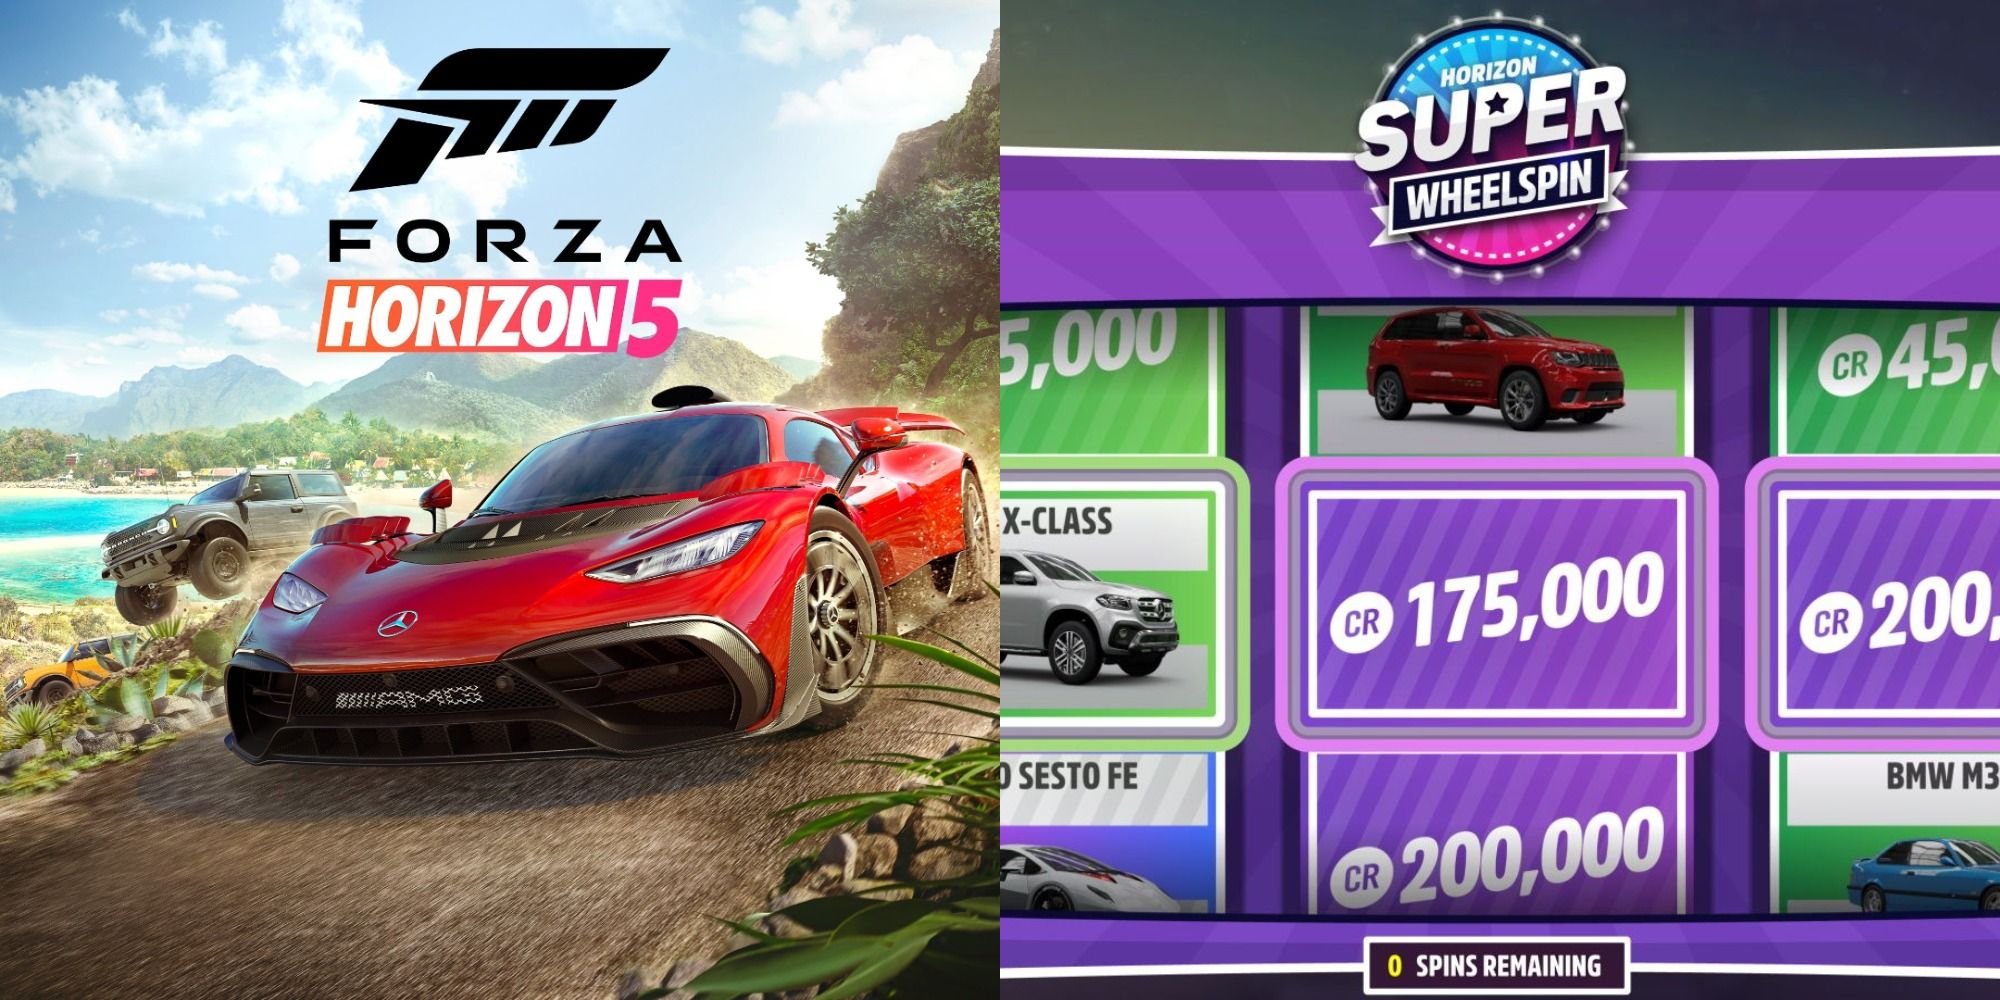 Split image showing the cover of Forza Horizon 5 and a super wheelspin in the game